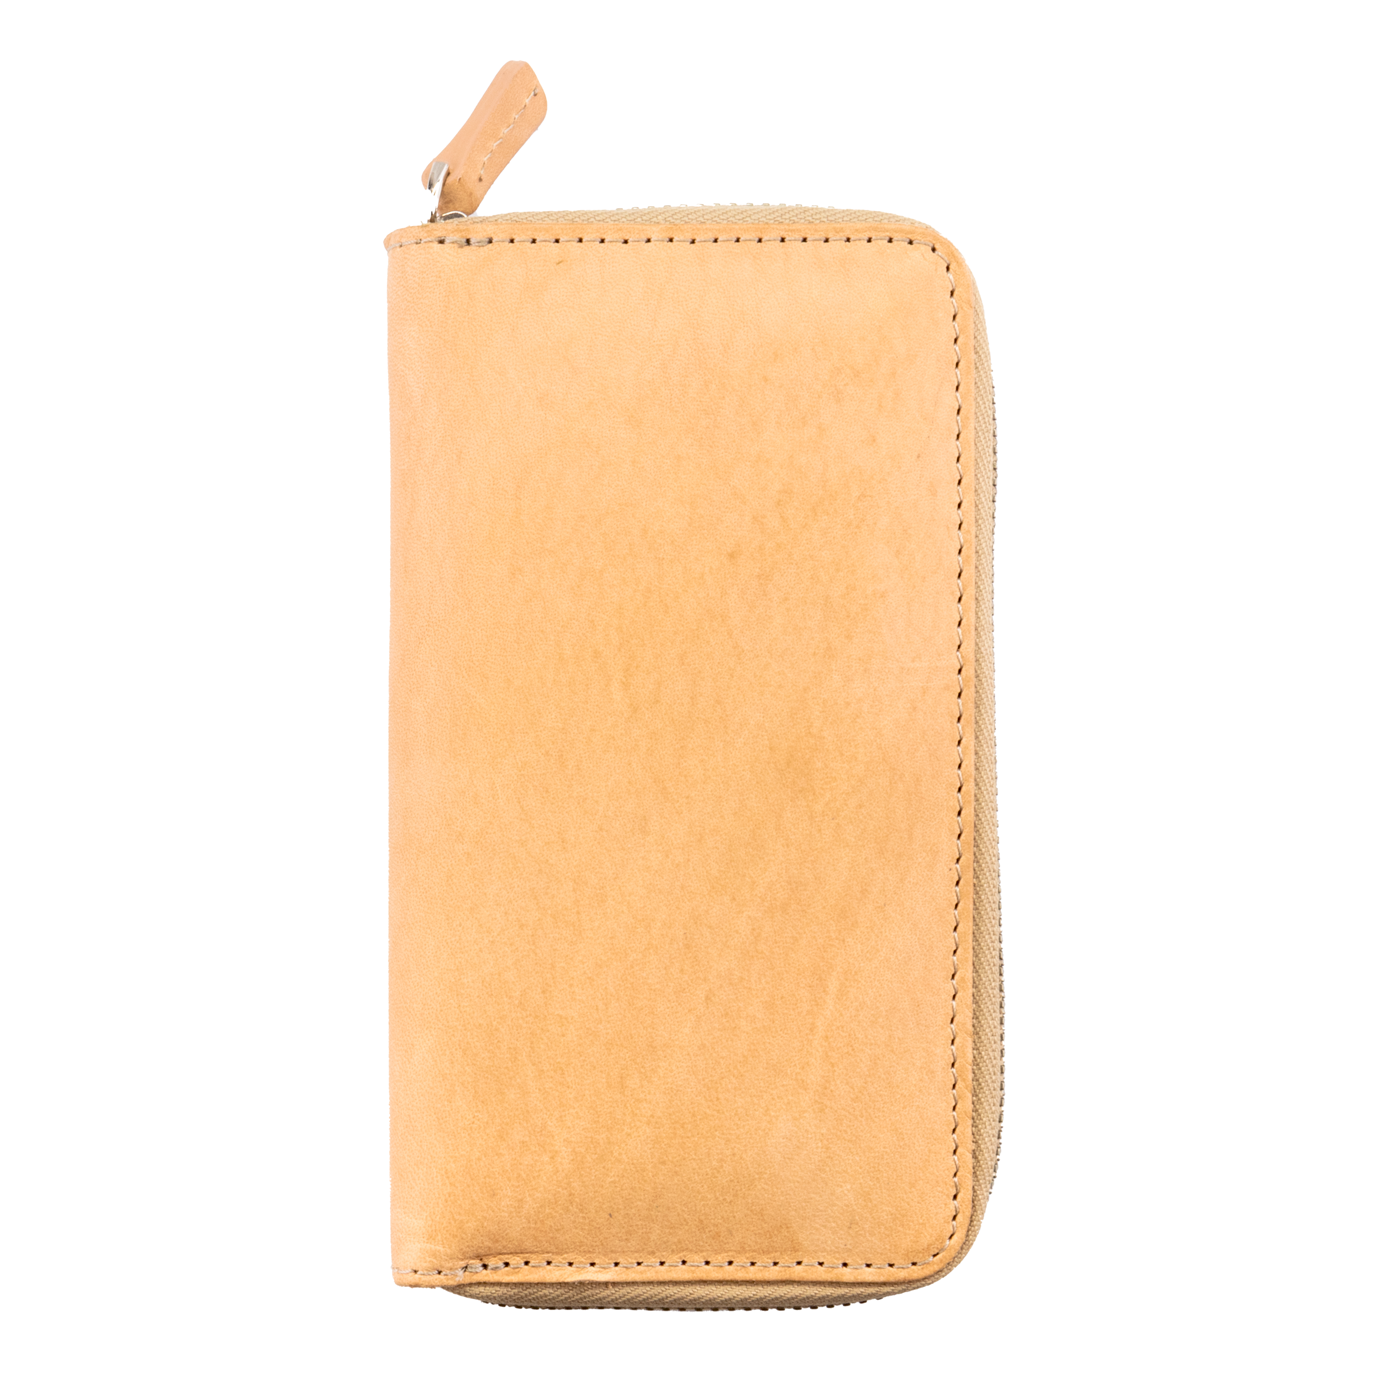 Galen Leather Co. Zippered 3 Slot Pen Case- Undyed Leather